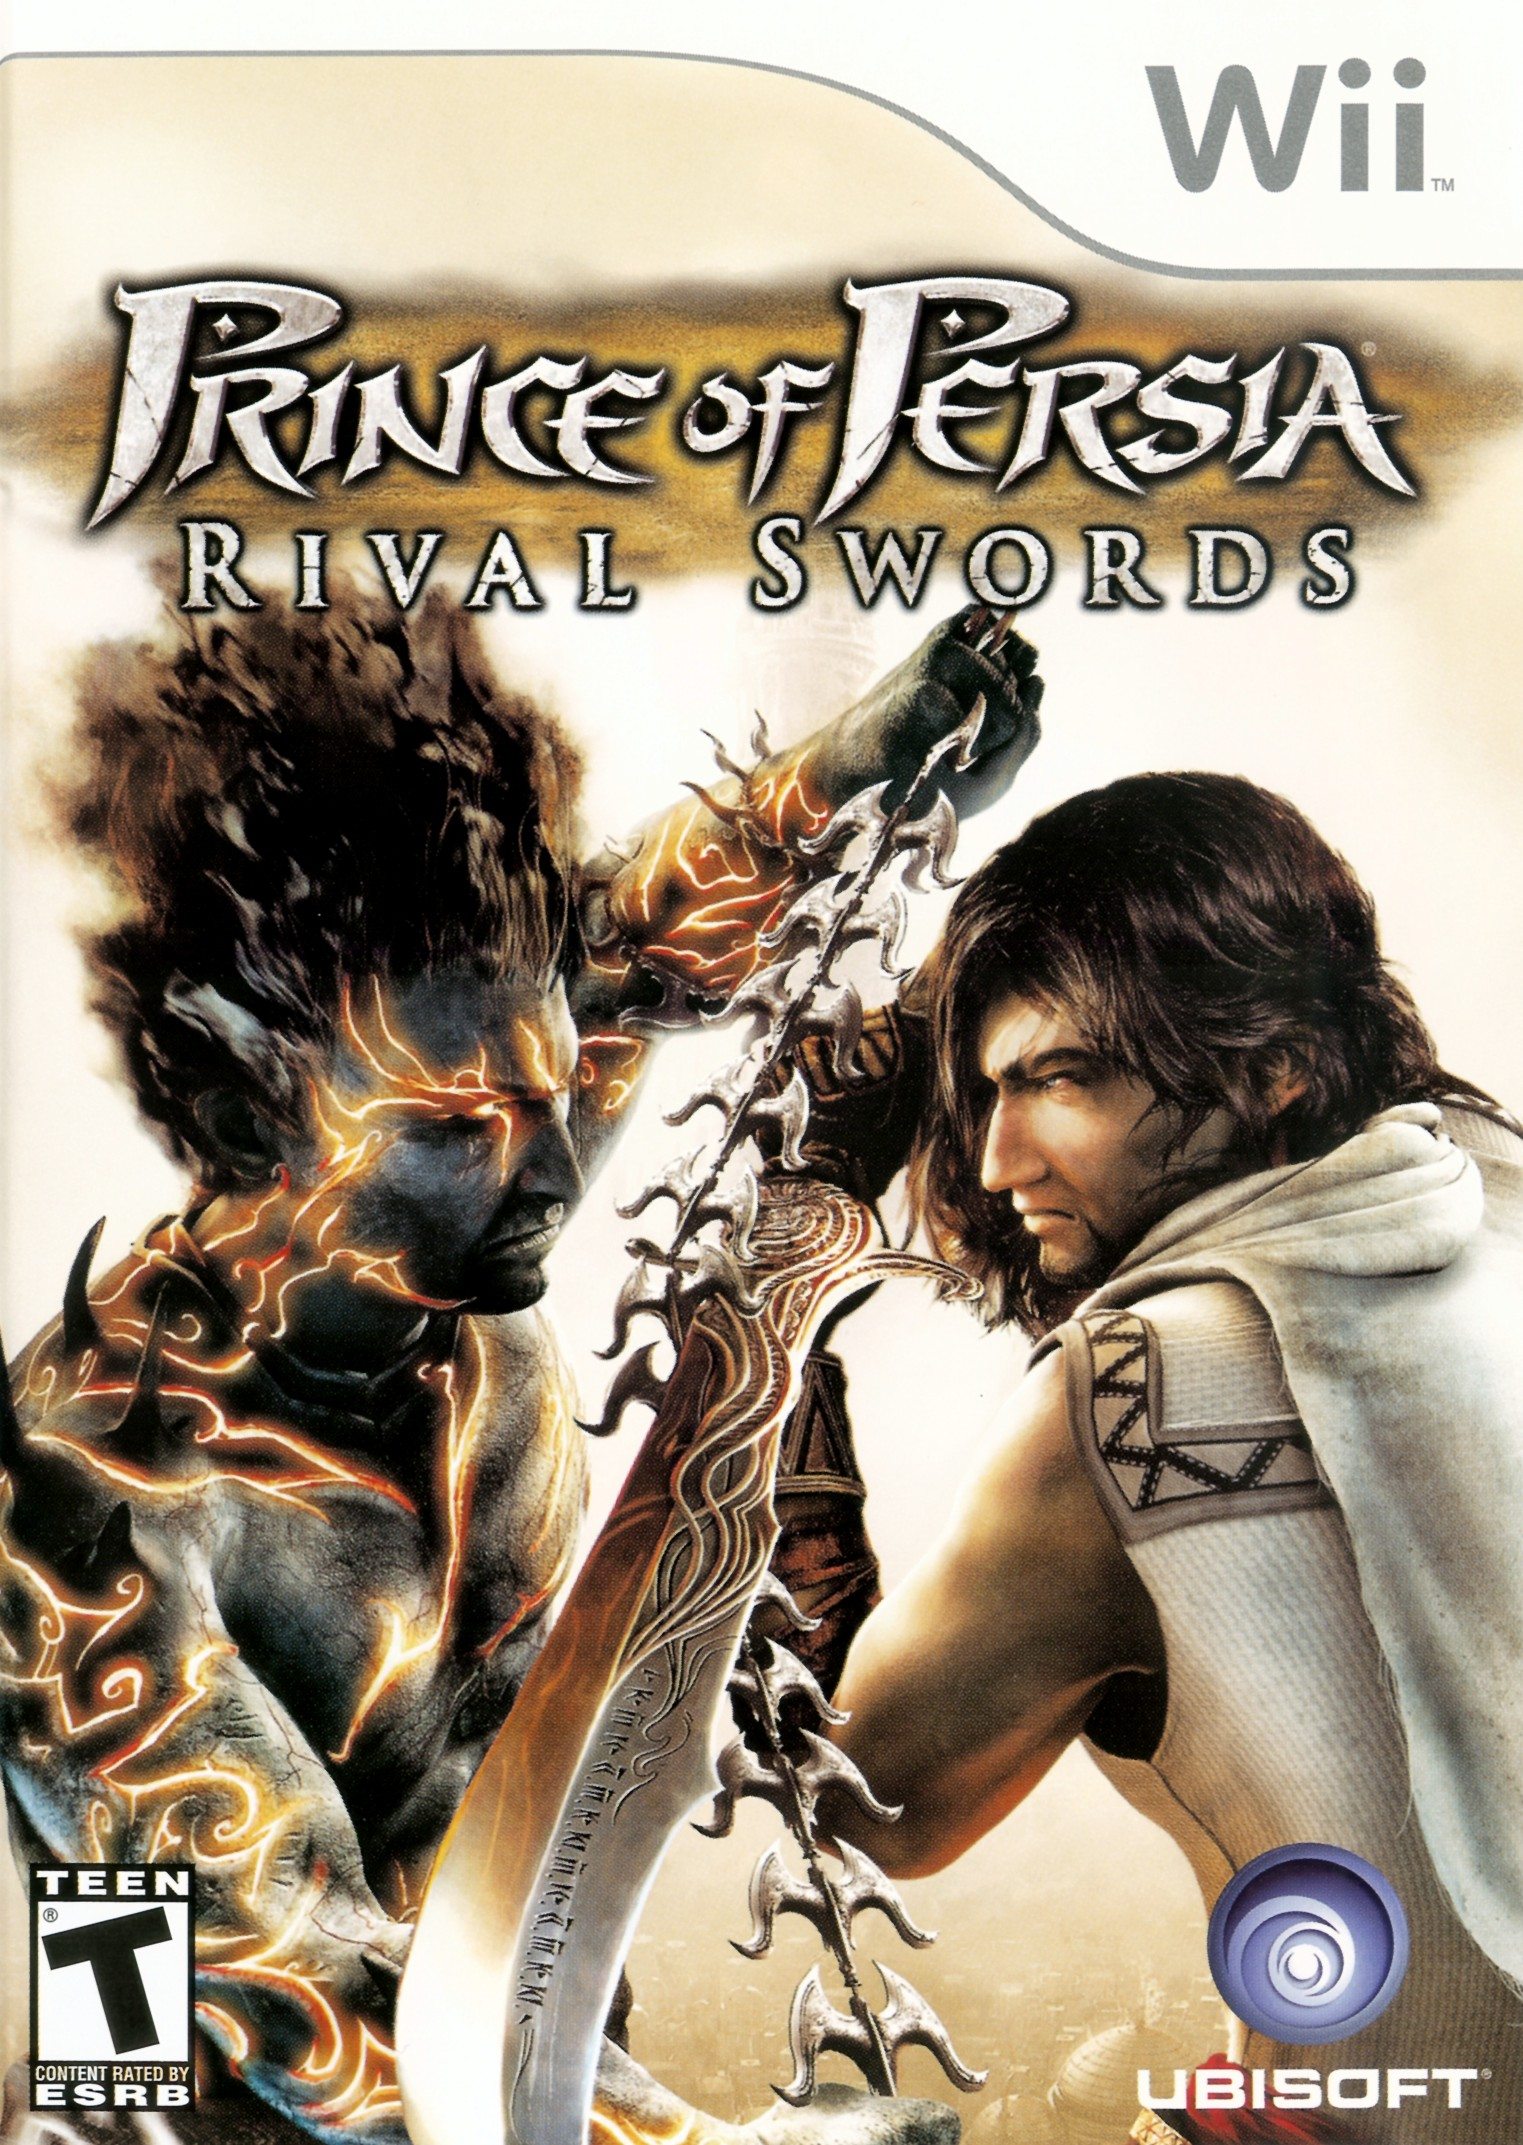 prince-of-persia-rival-swords-wii-disk-only-8888173519-ebay